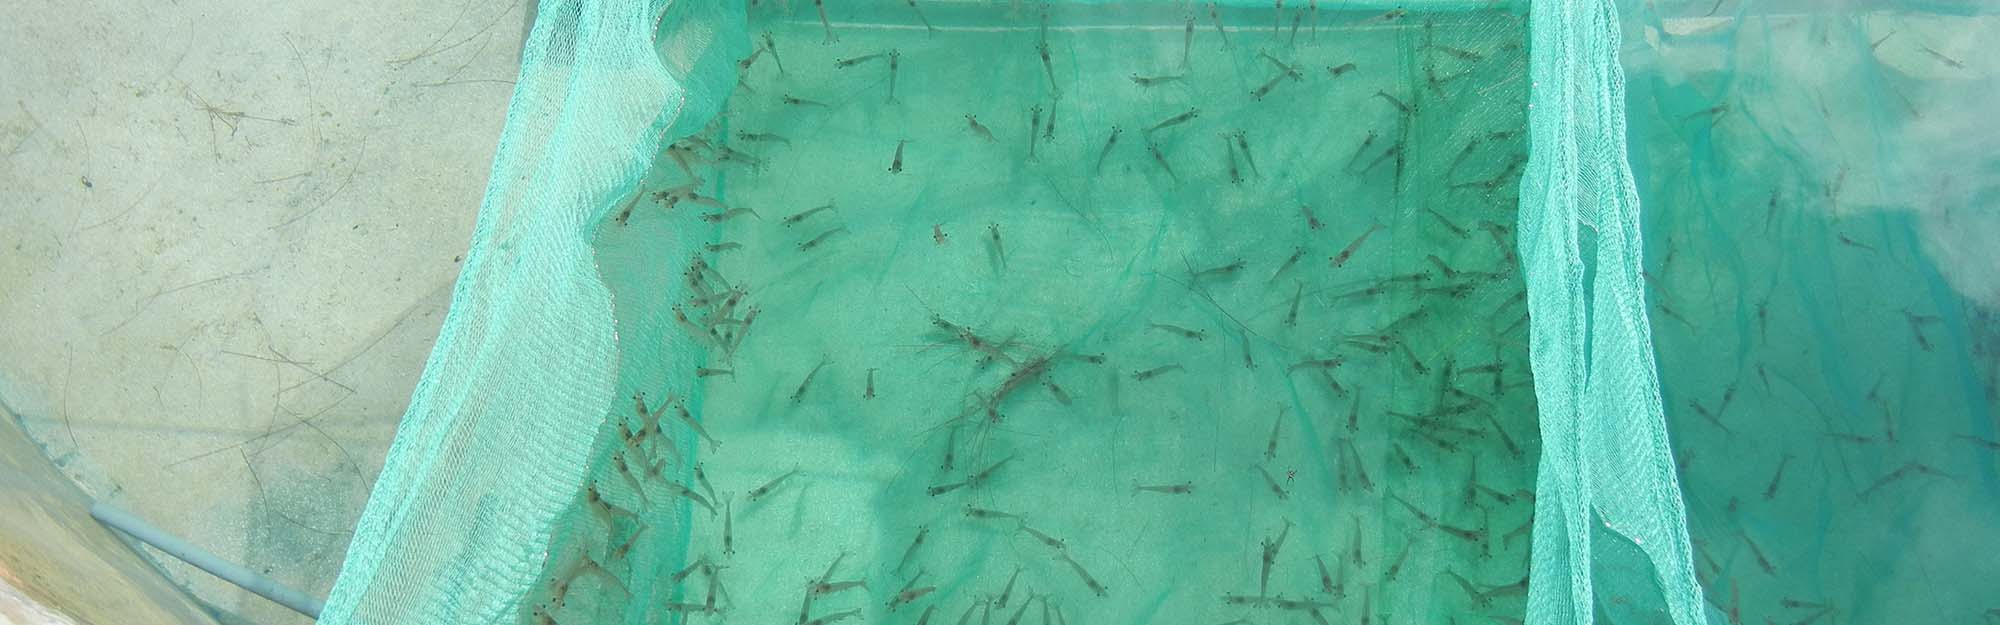 Dr. Hui Gong Jiang conducts research on shrimp families and salinity preferences.